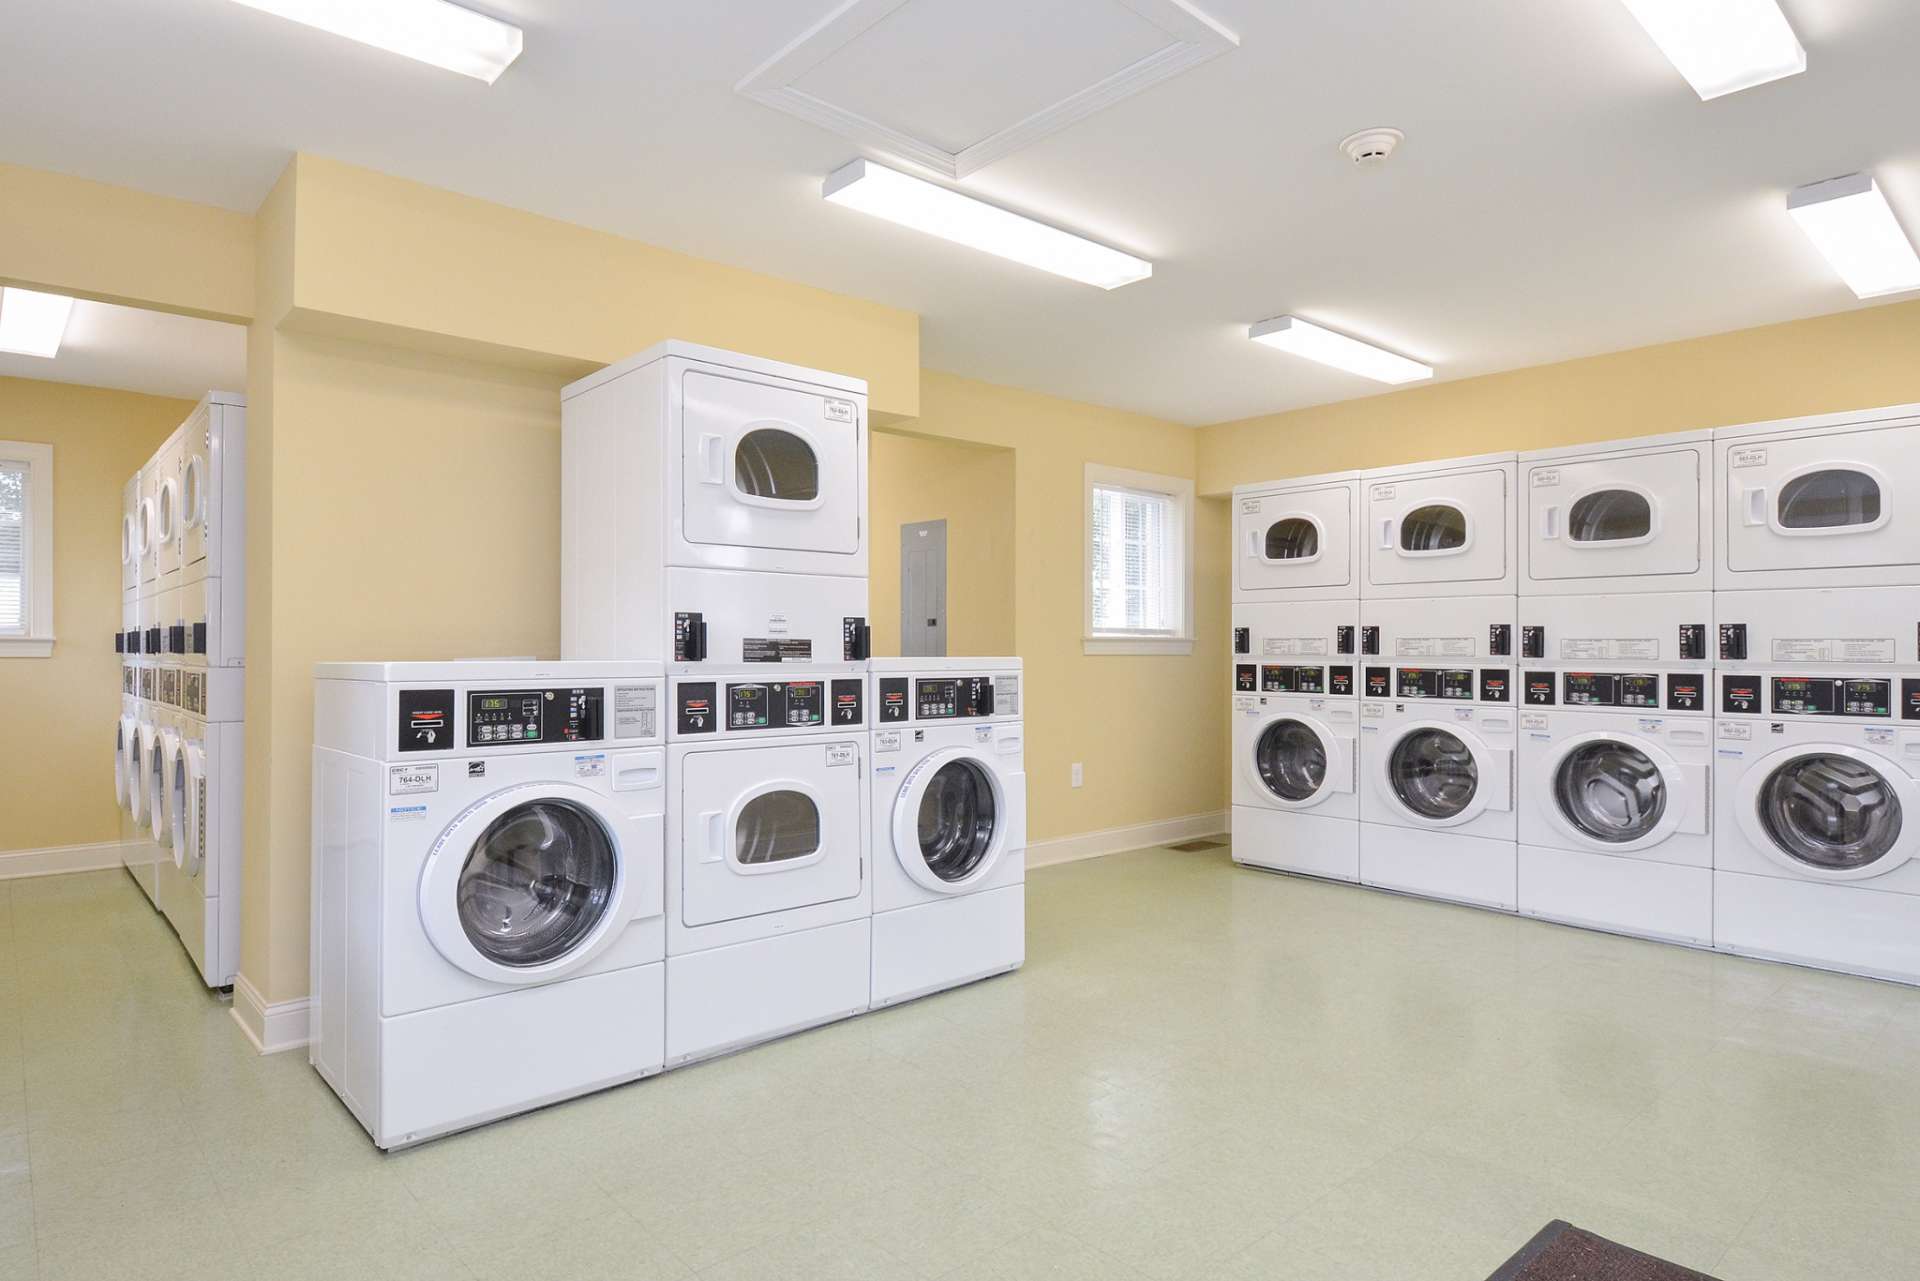 Resident laundry room at Greenville on 141 Apartments and Townhomes.